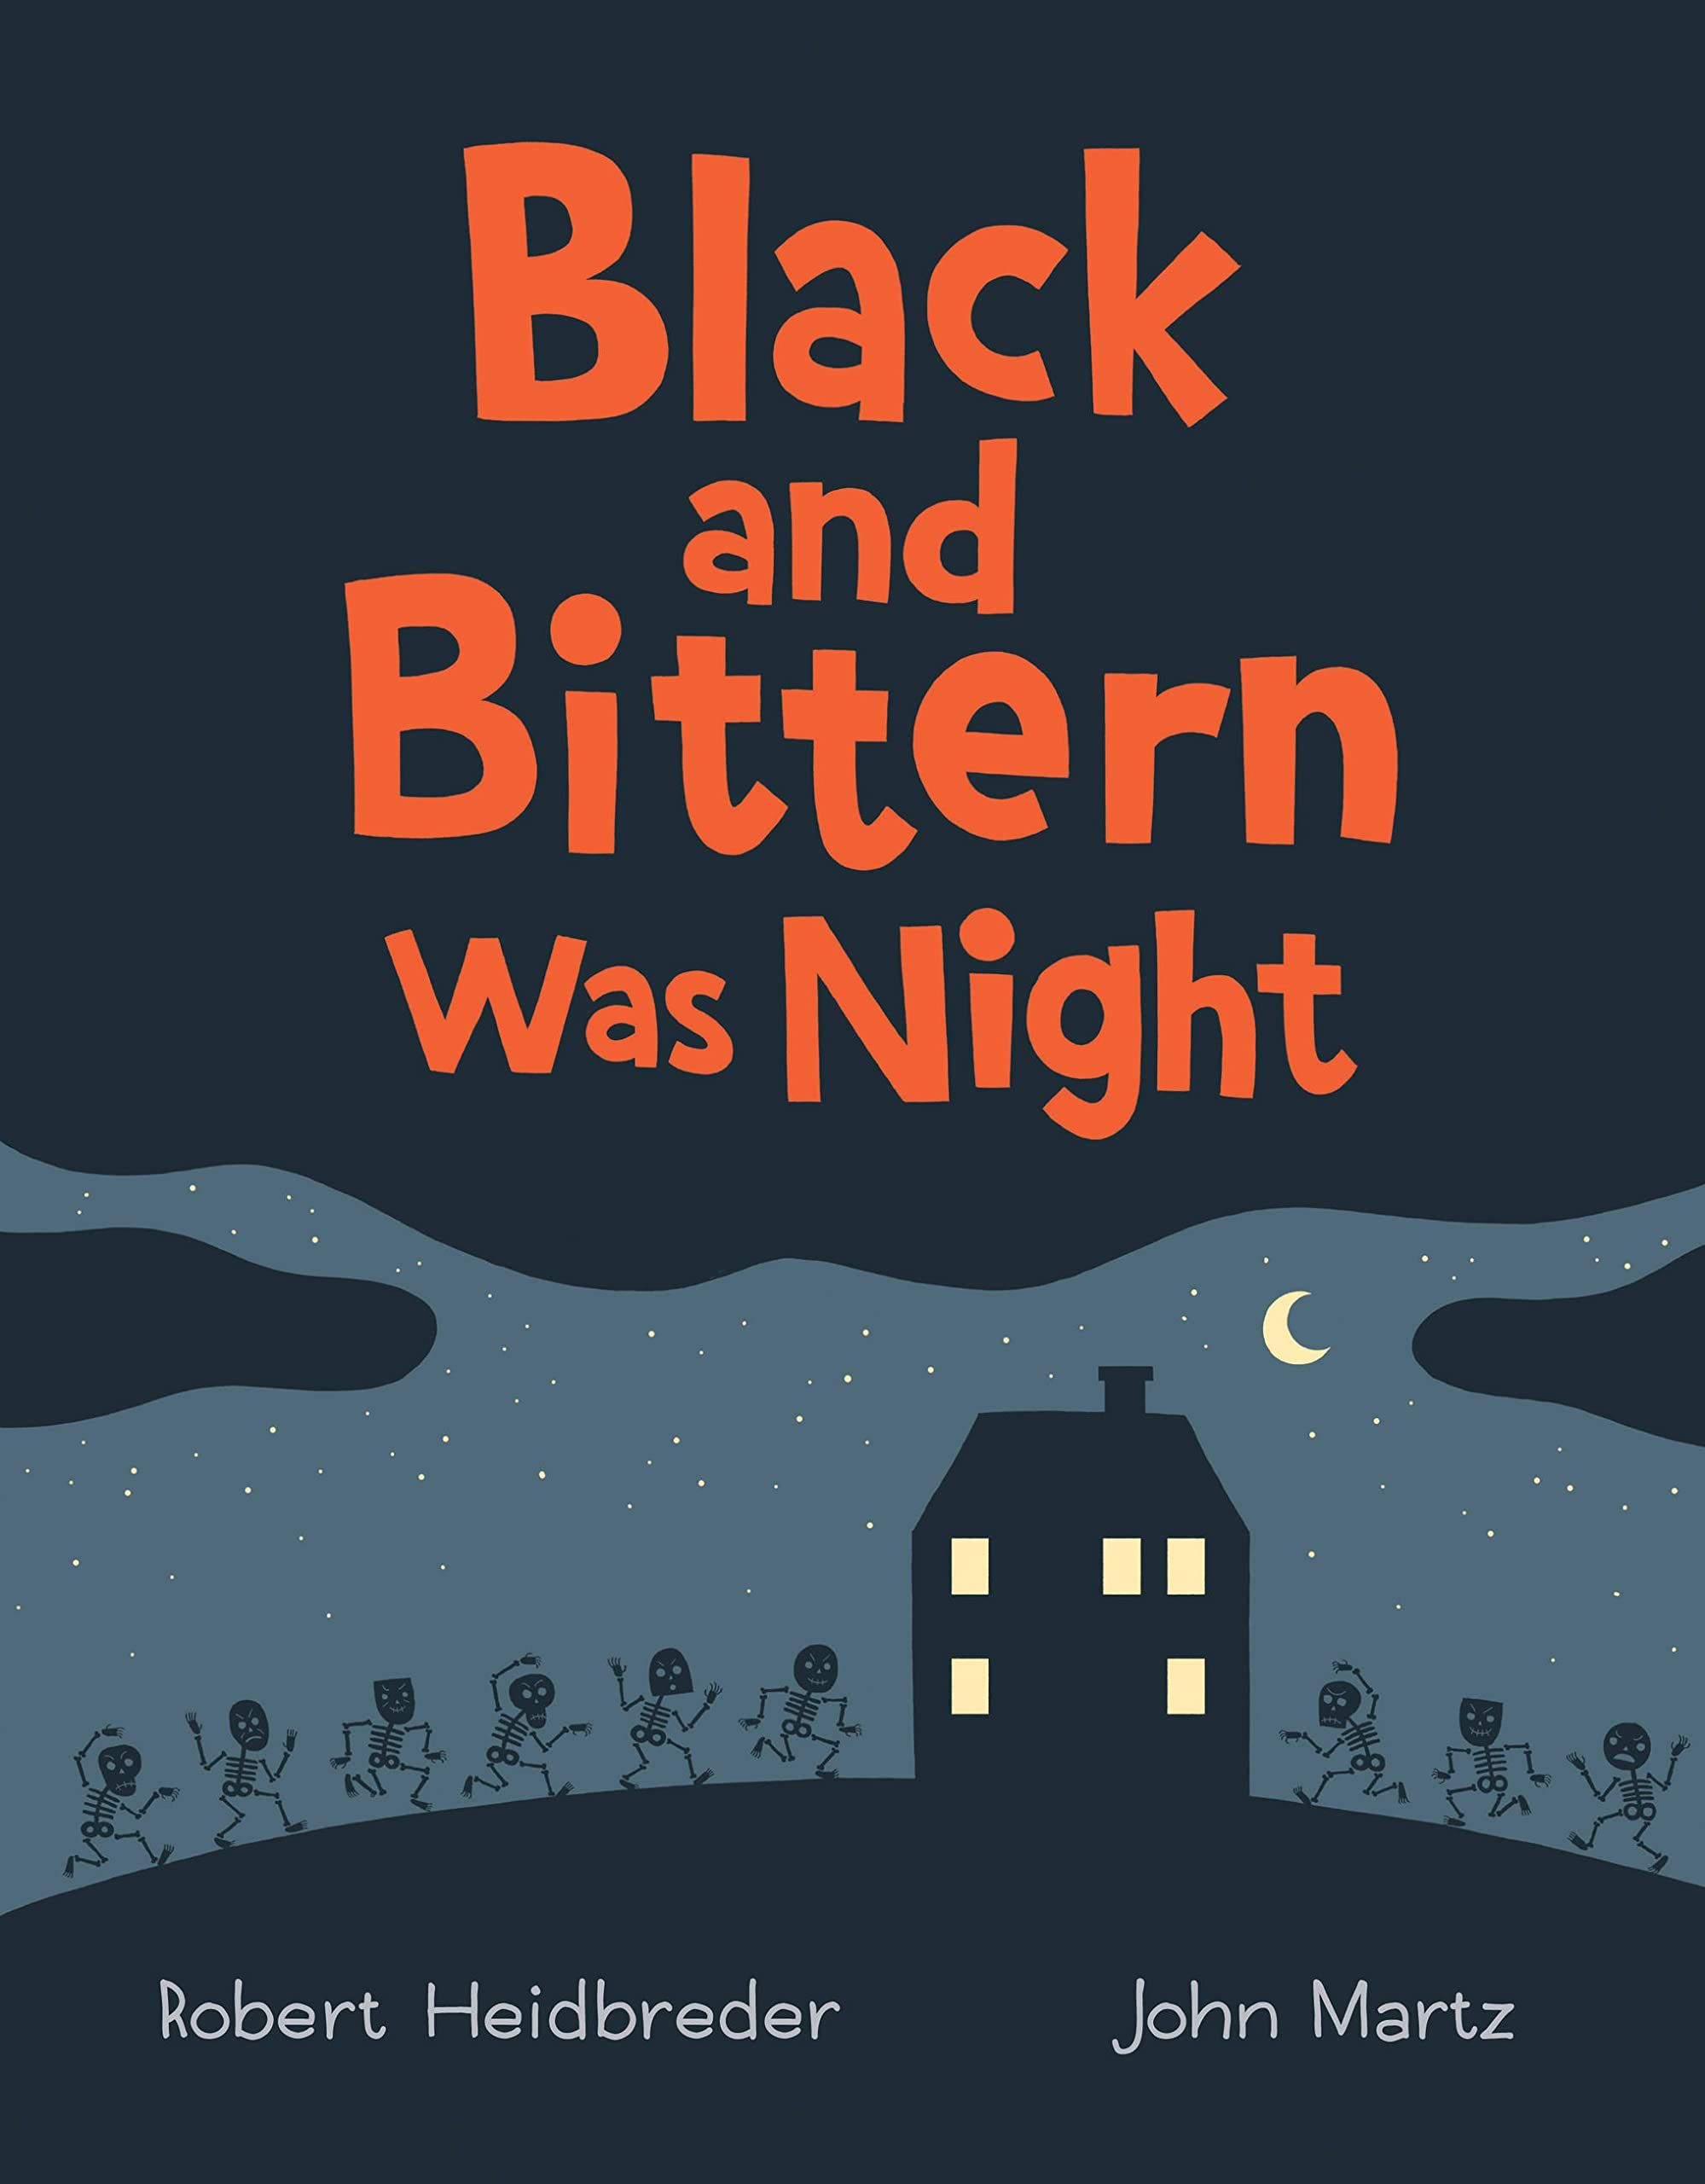 Black and Bittern Was Night book cover